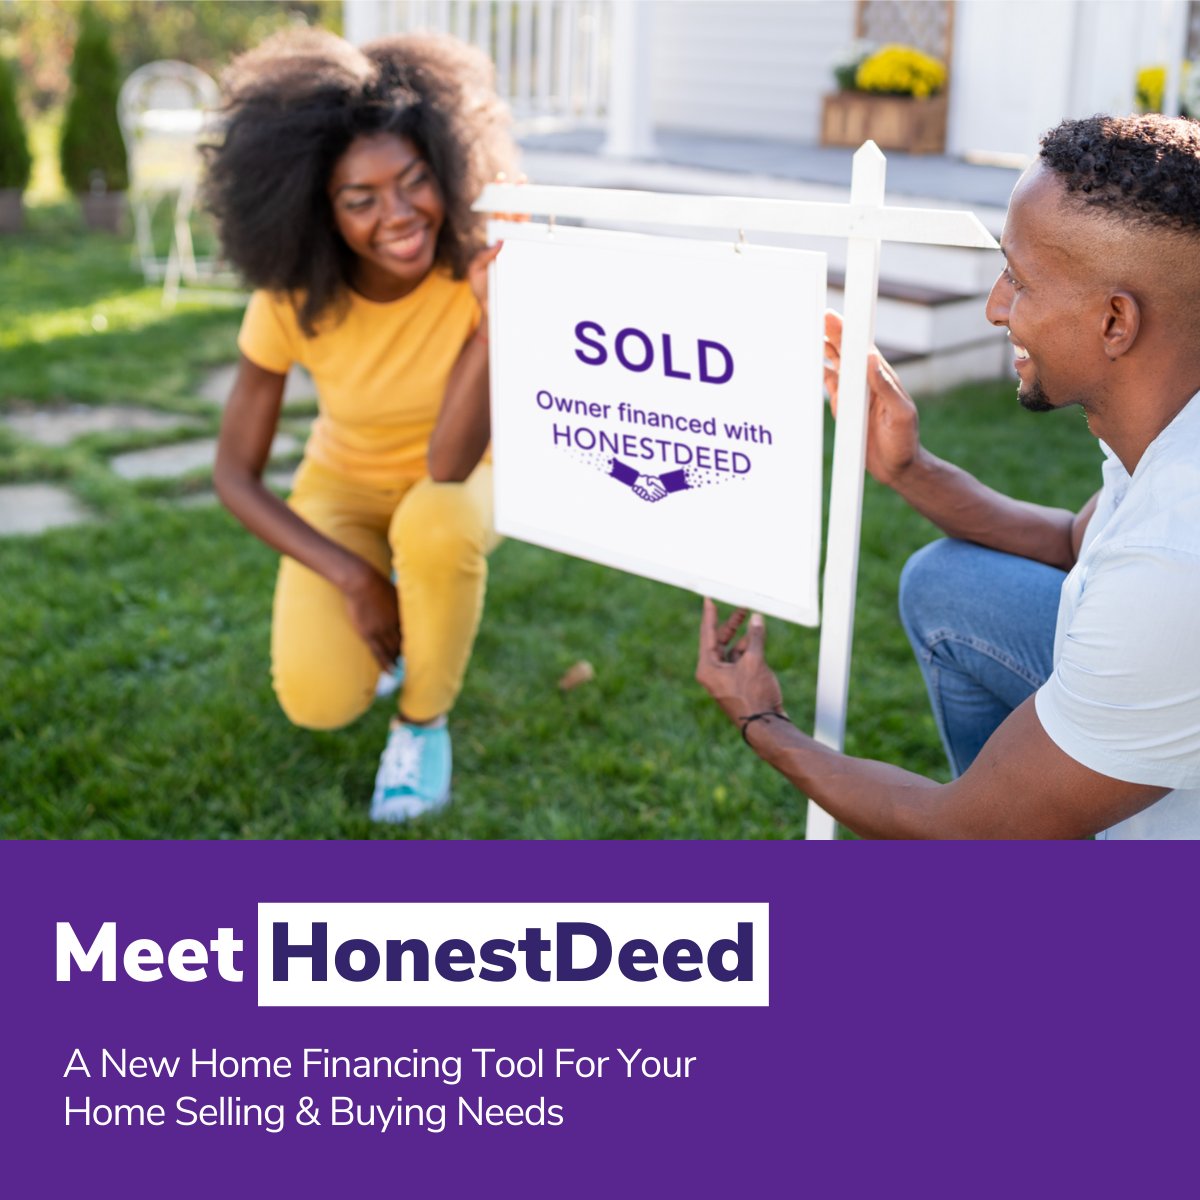 Come check us out! Learn more about us, why we got started and how we're providing new home financing tools that meet your needs. 👇 medium.com/@HonestDeed/me… #realestate #ownerfinancing #realestateinvesting